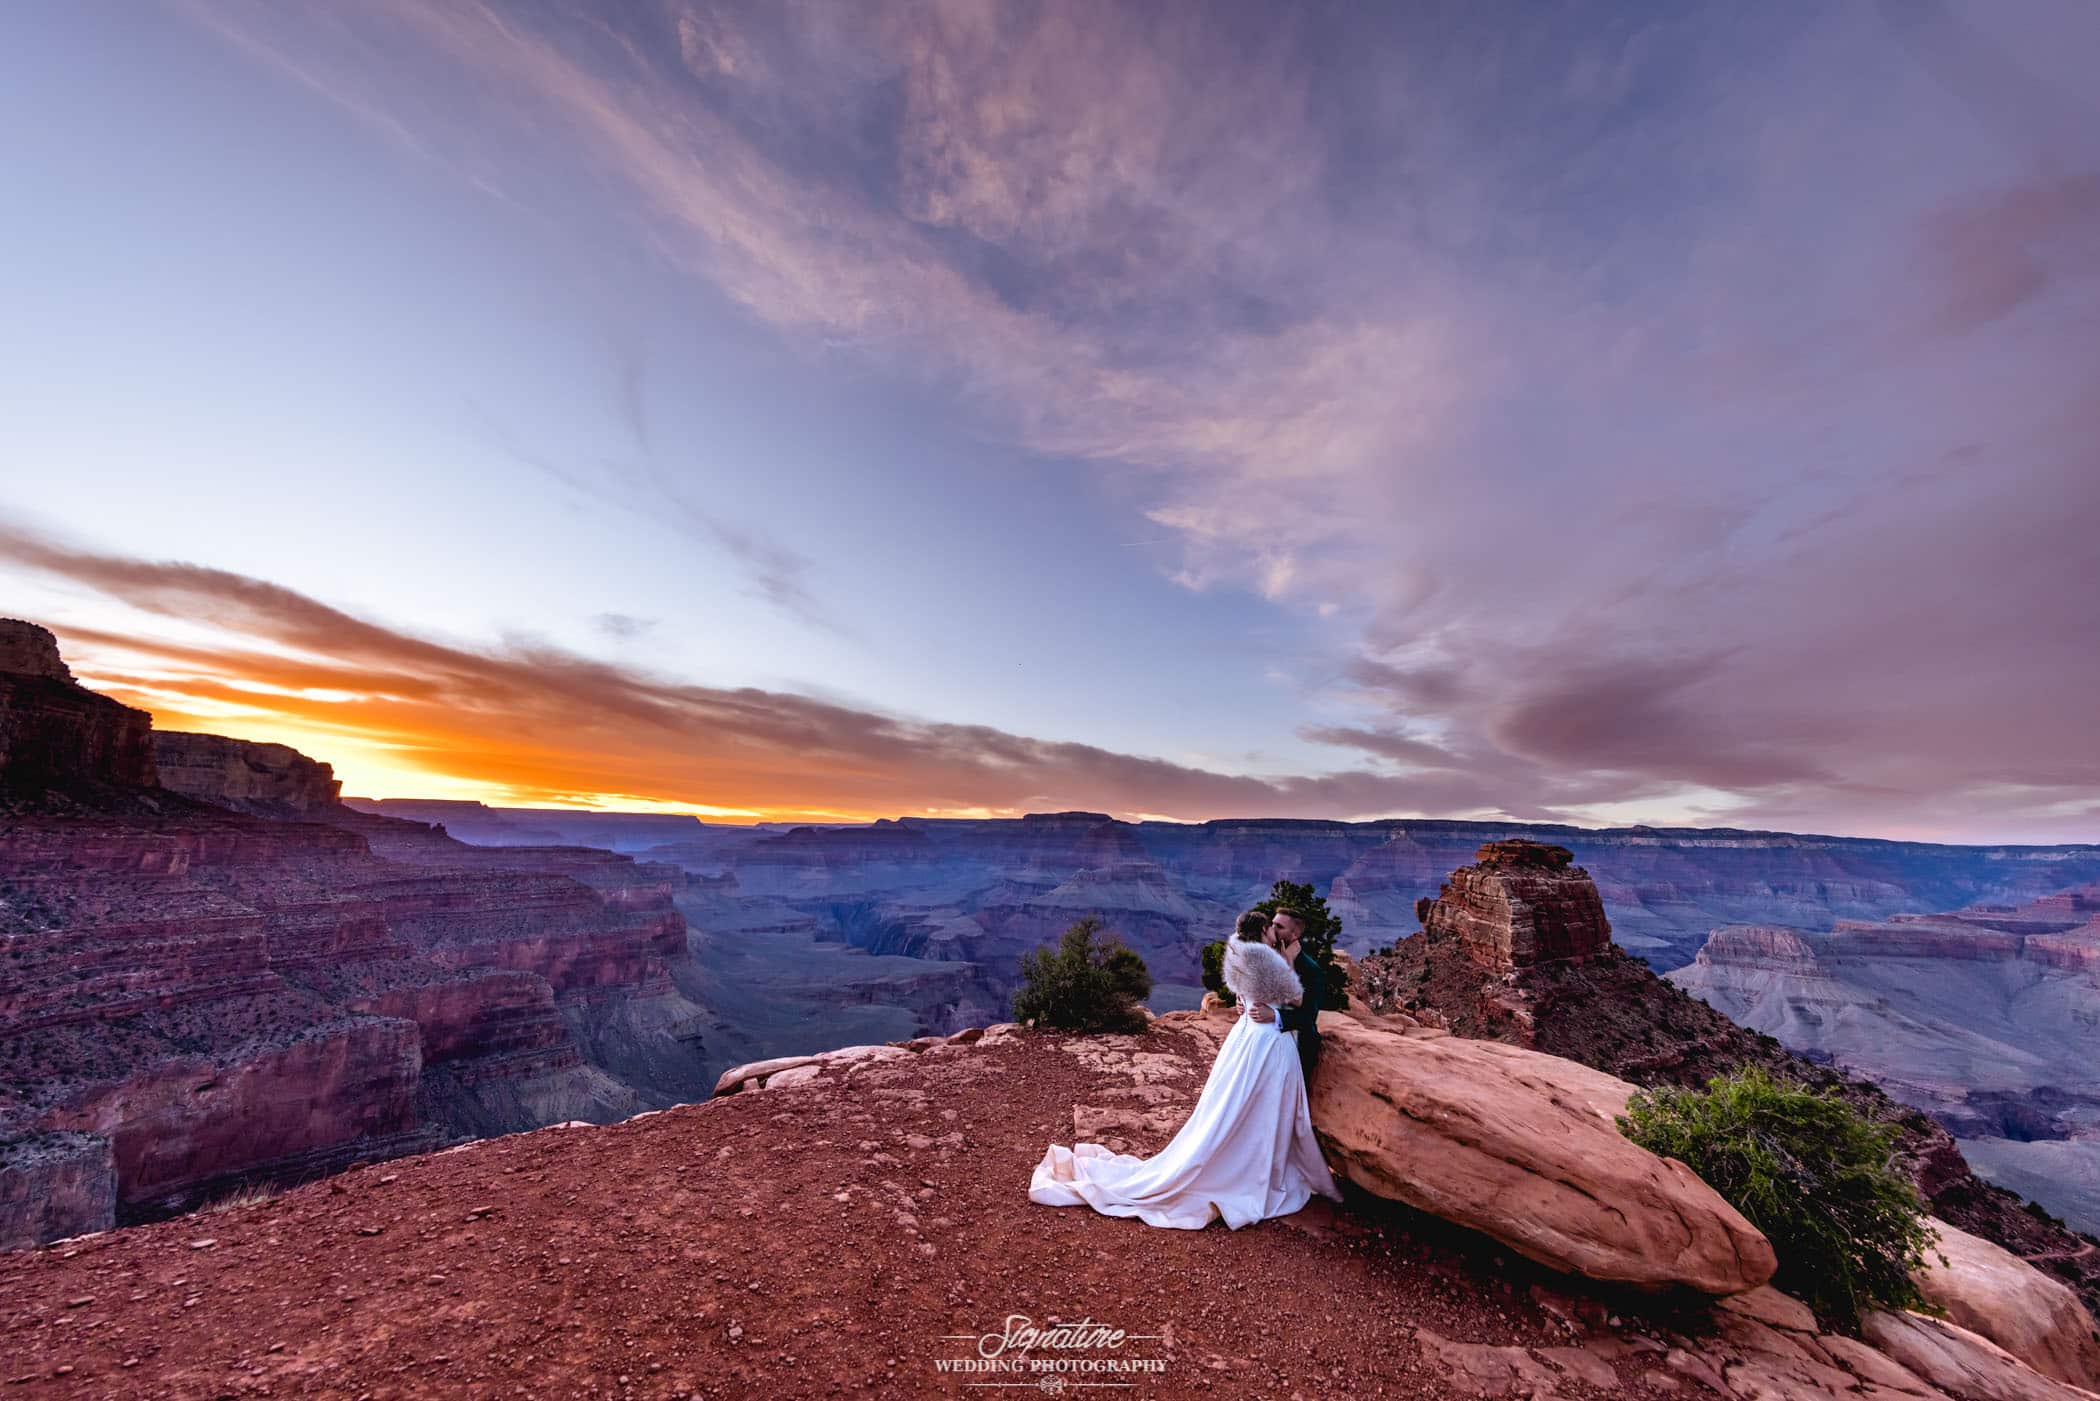 Bride and groom kissing on desert mountain top at sunset